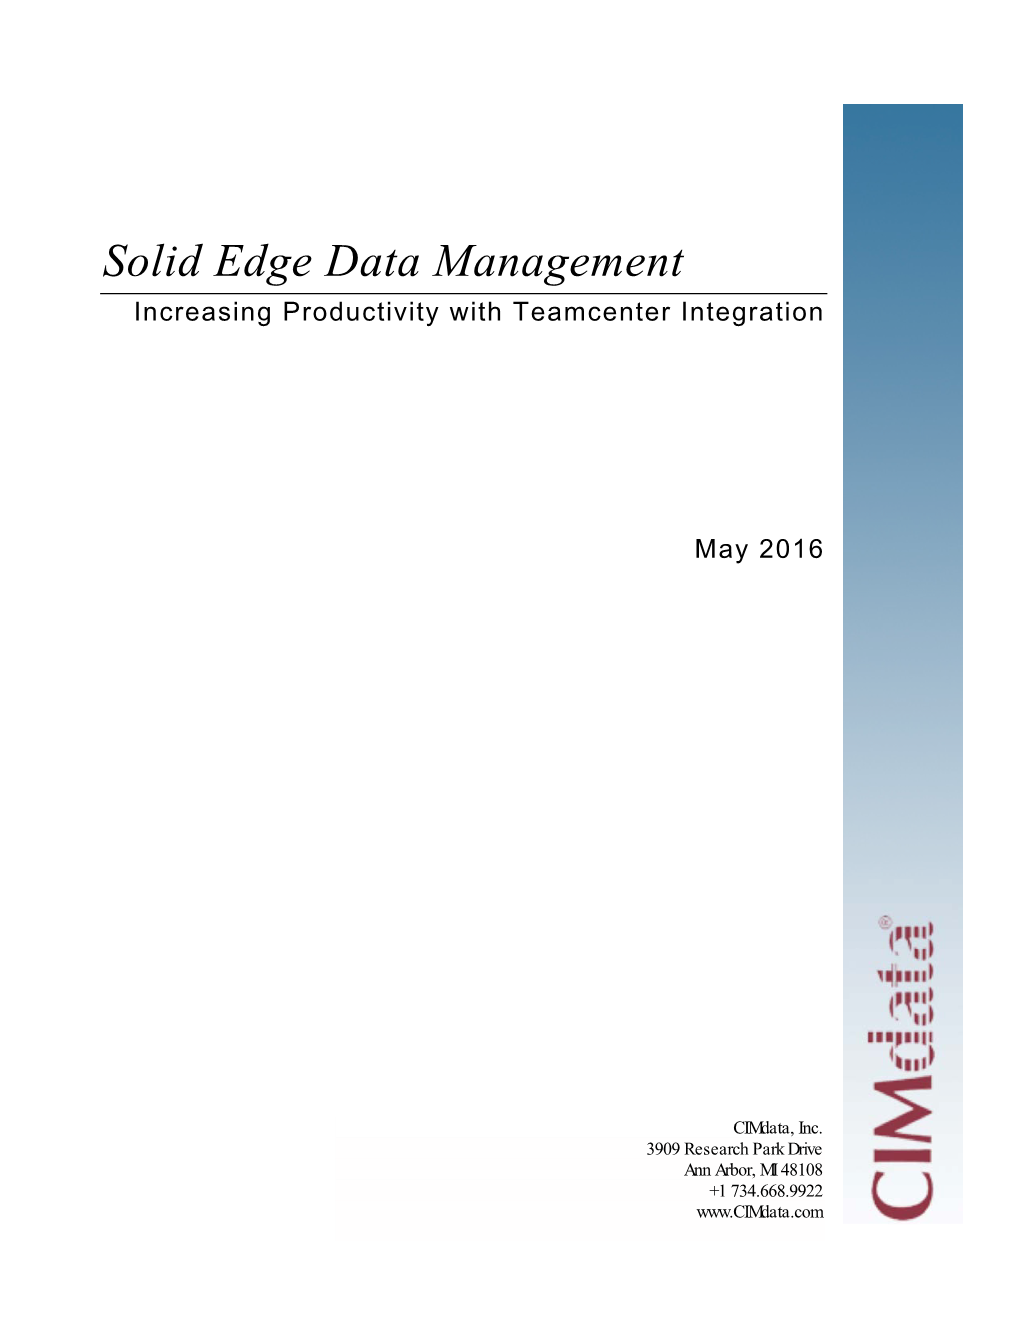 Solid Edge Data Management Increasing Productivity with Teamcenter Integration